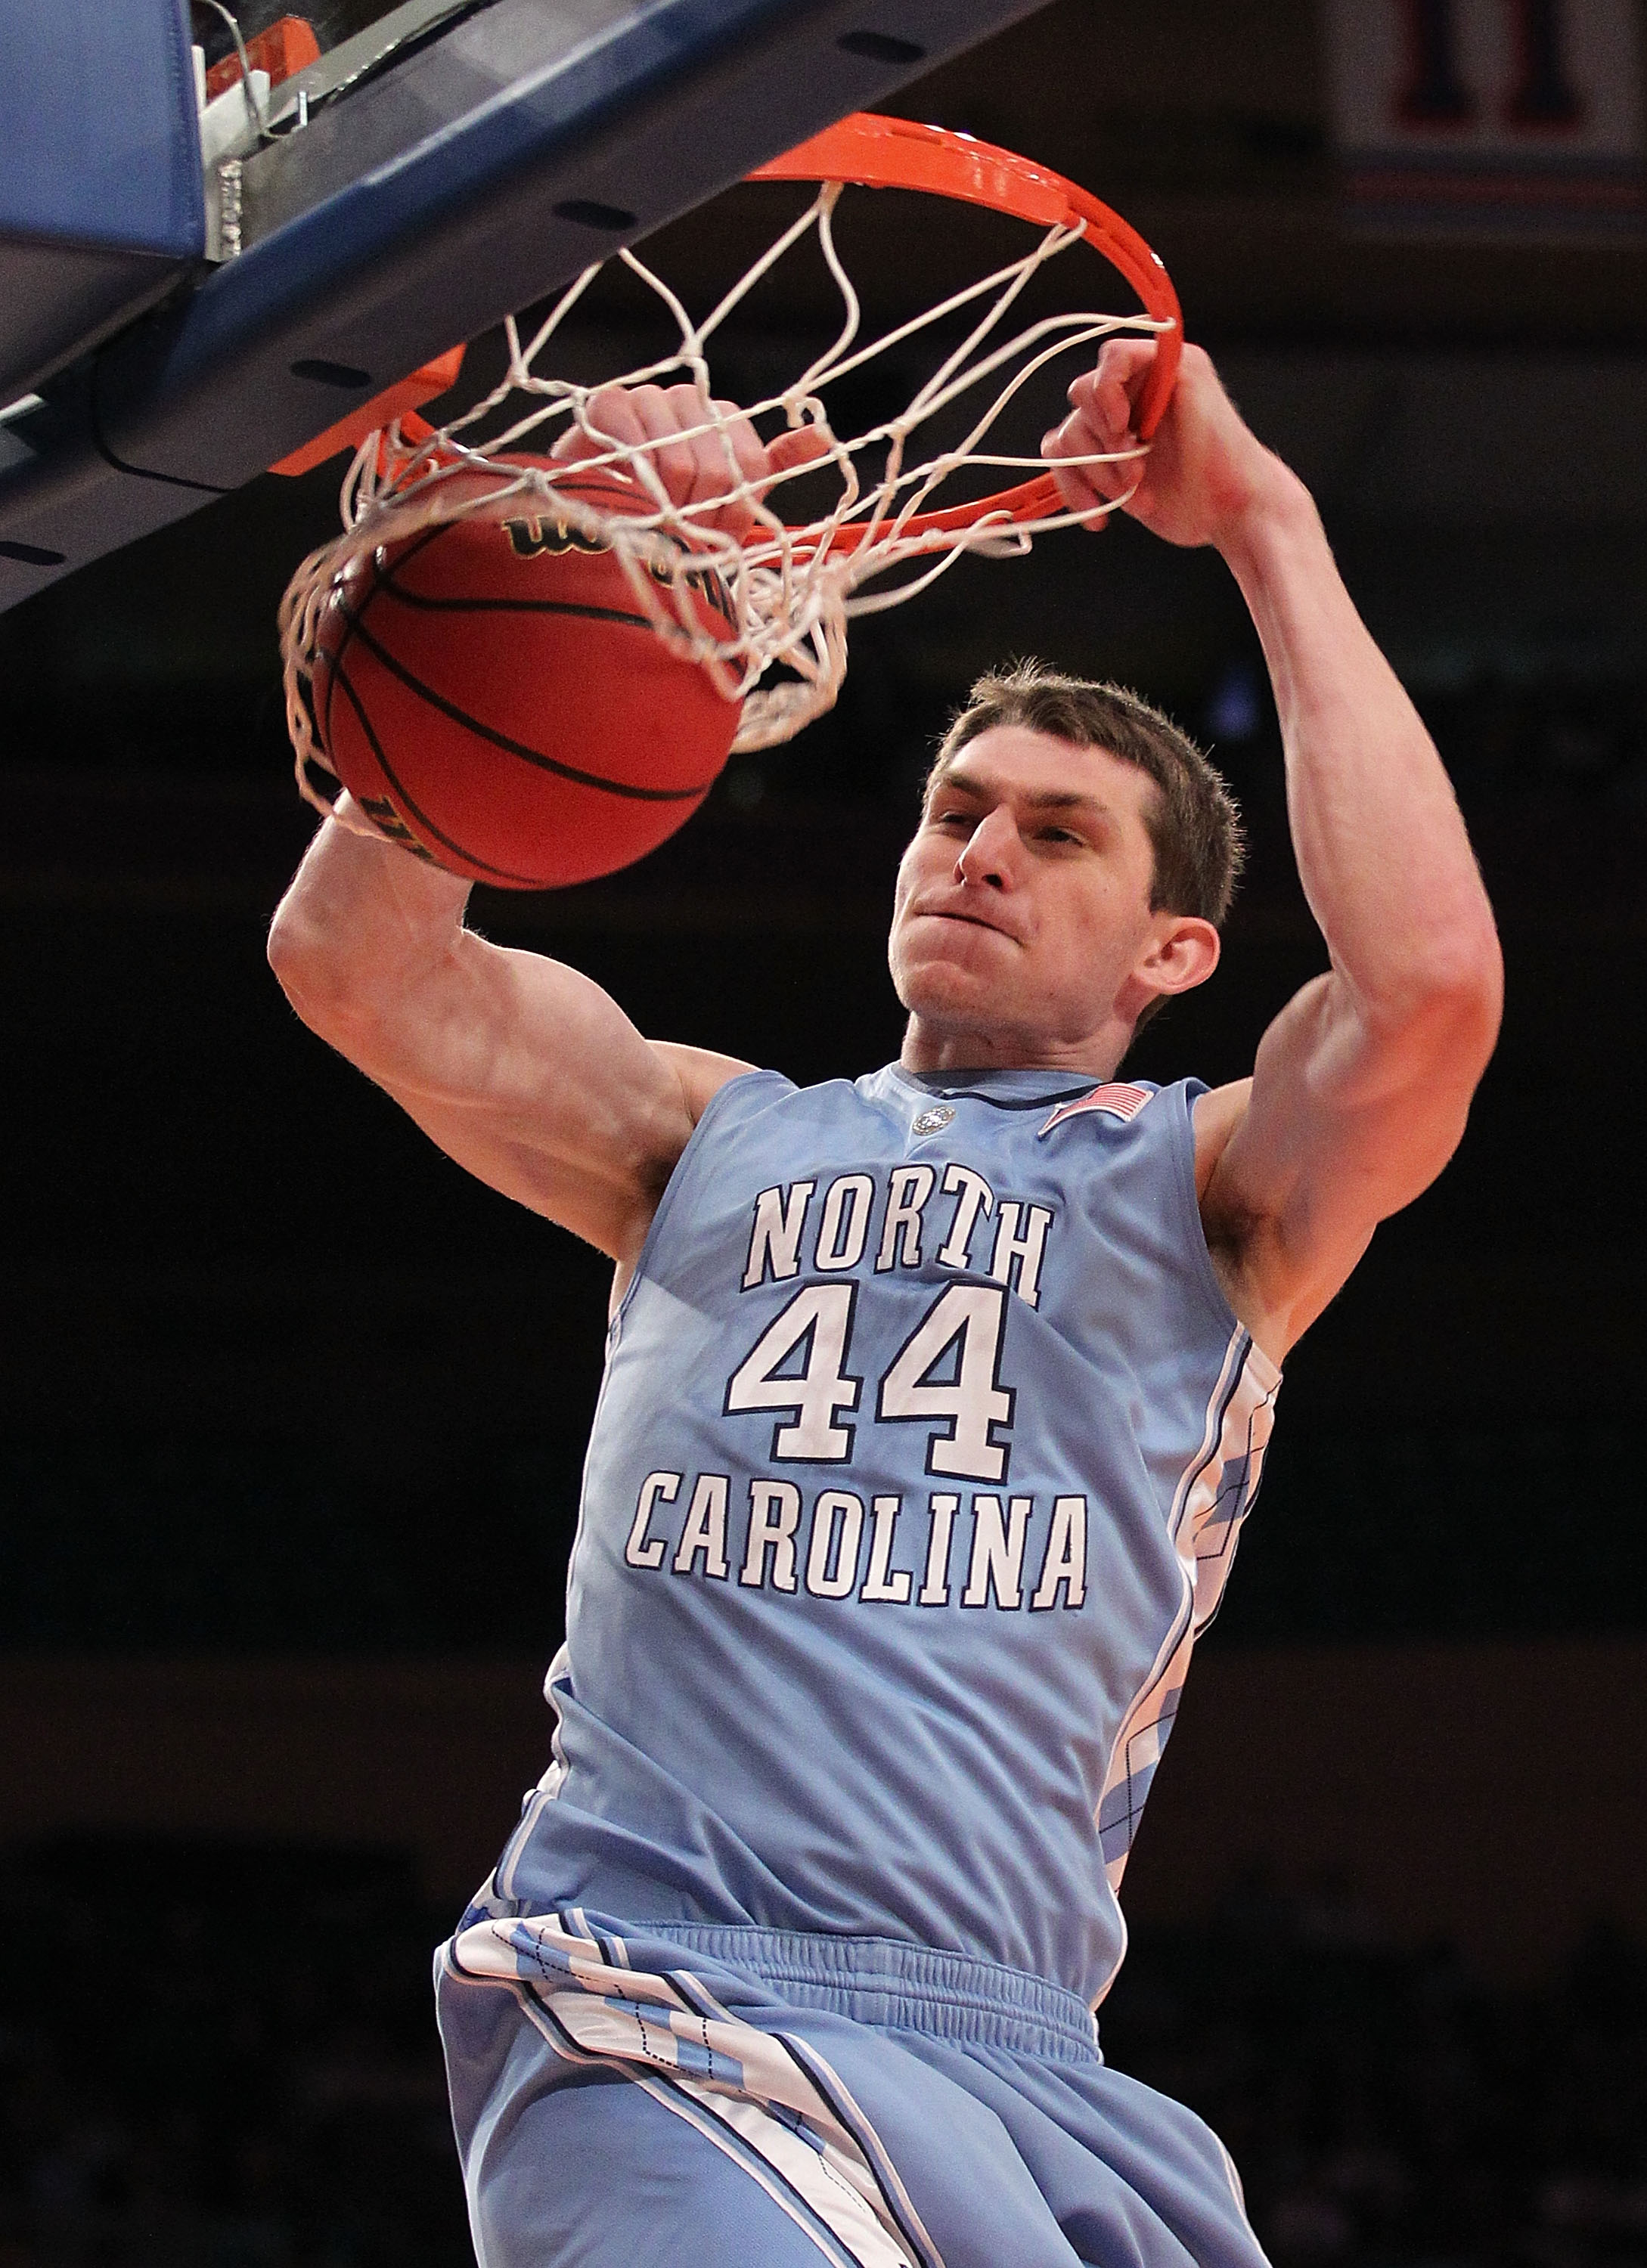 NEW YORK - MARCH 30: Tyler Zeller #44 of the North Carolina Tar Heels dunks the ball against Rhode Island Rams at Madison Square Garden on March 30, 2010 in New York, New York.  (Photo by Nick Laham/Getty Images)